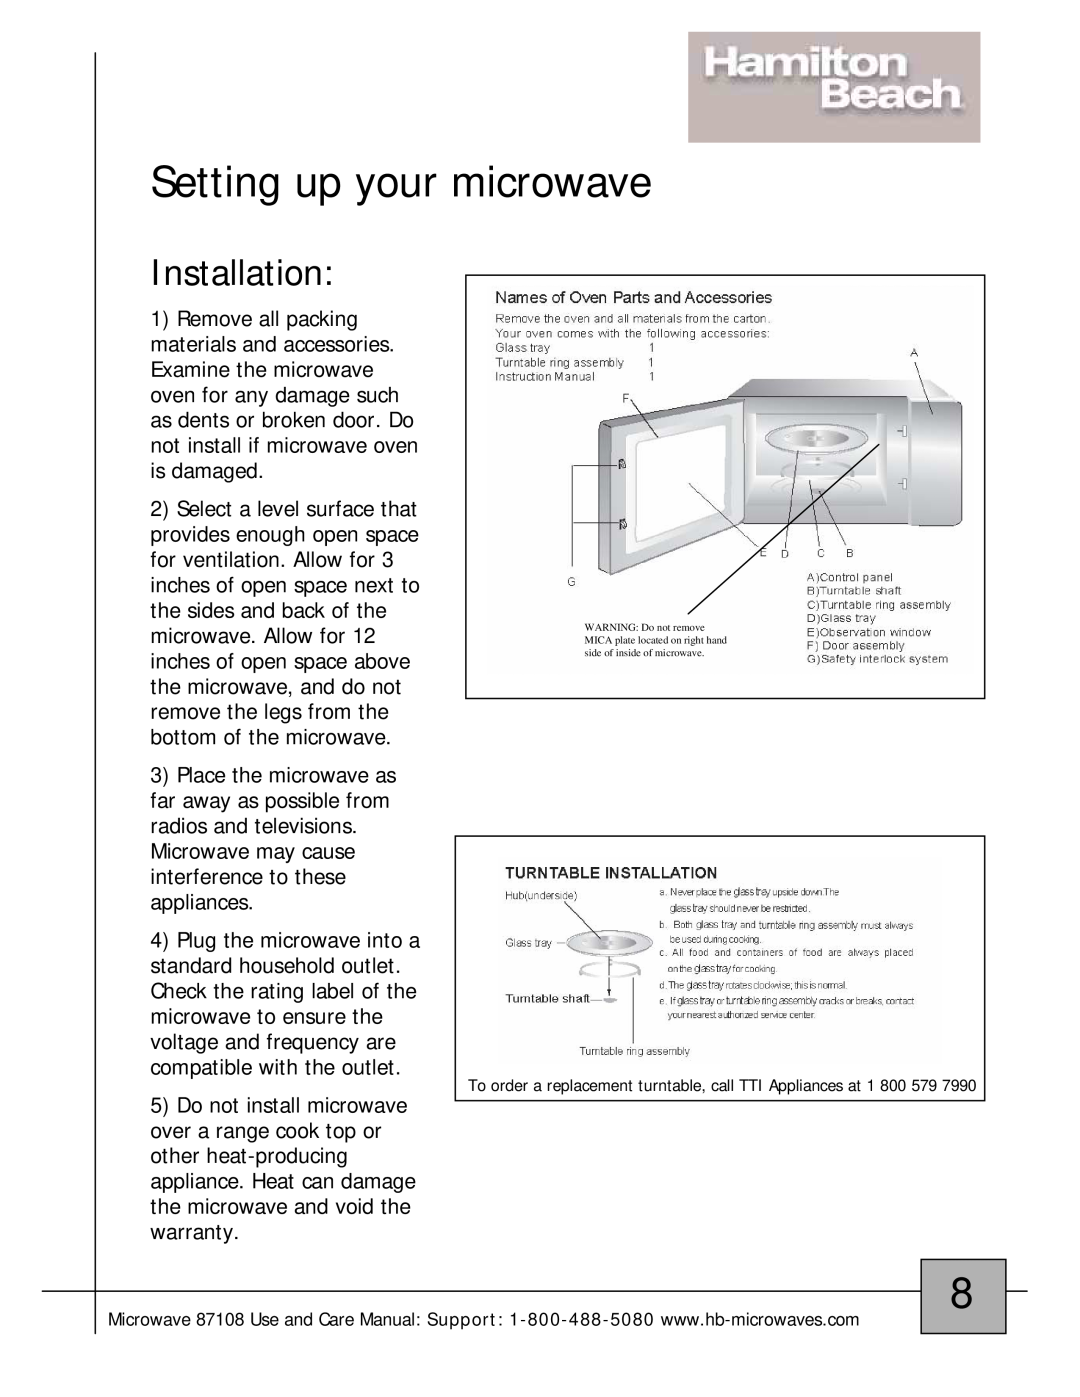 Hamilton Beach 87108 owner manual Setting up your microwave, Installation 